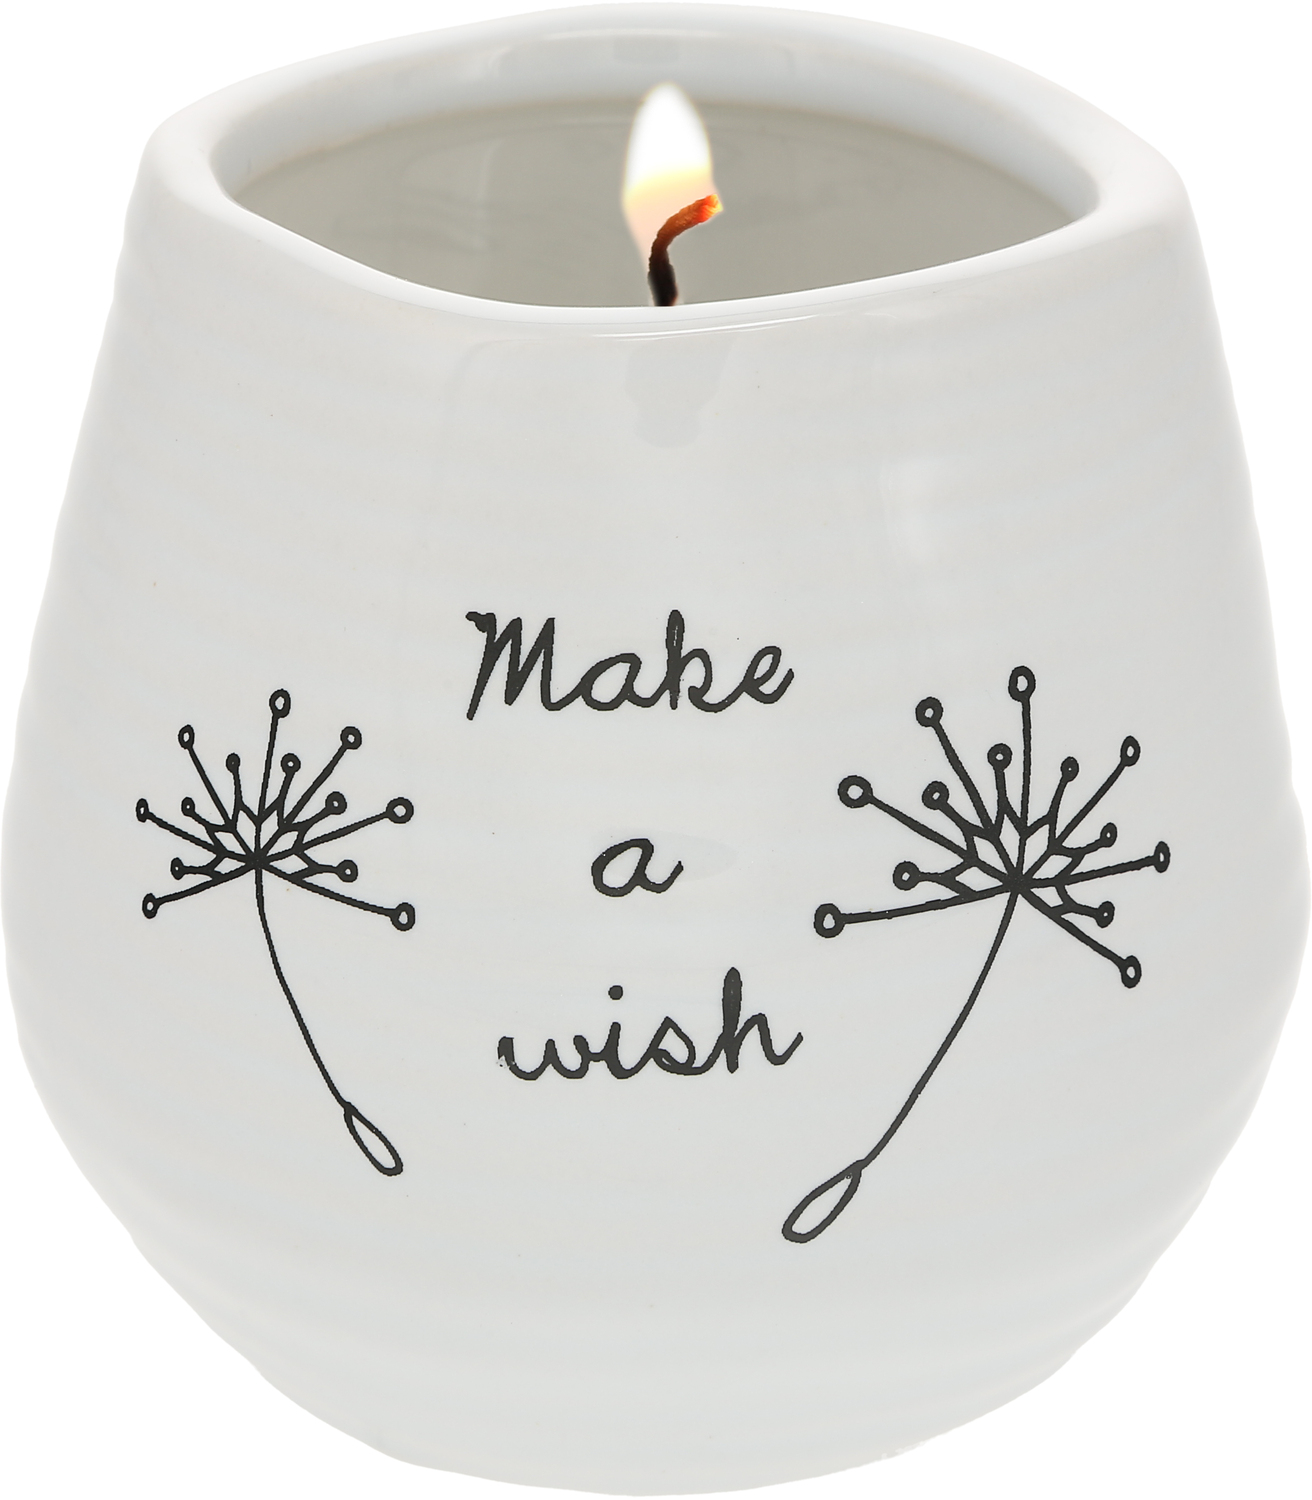 Make a Wish by Dandelion Wishes - Make a Wish - 8 oz - 100% Soy Wax Candle
Scent: Serenity